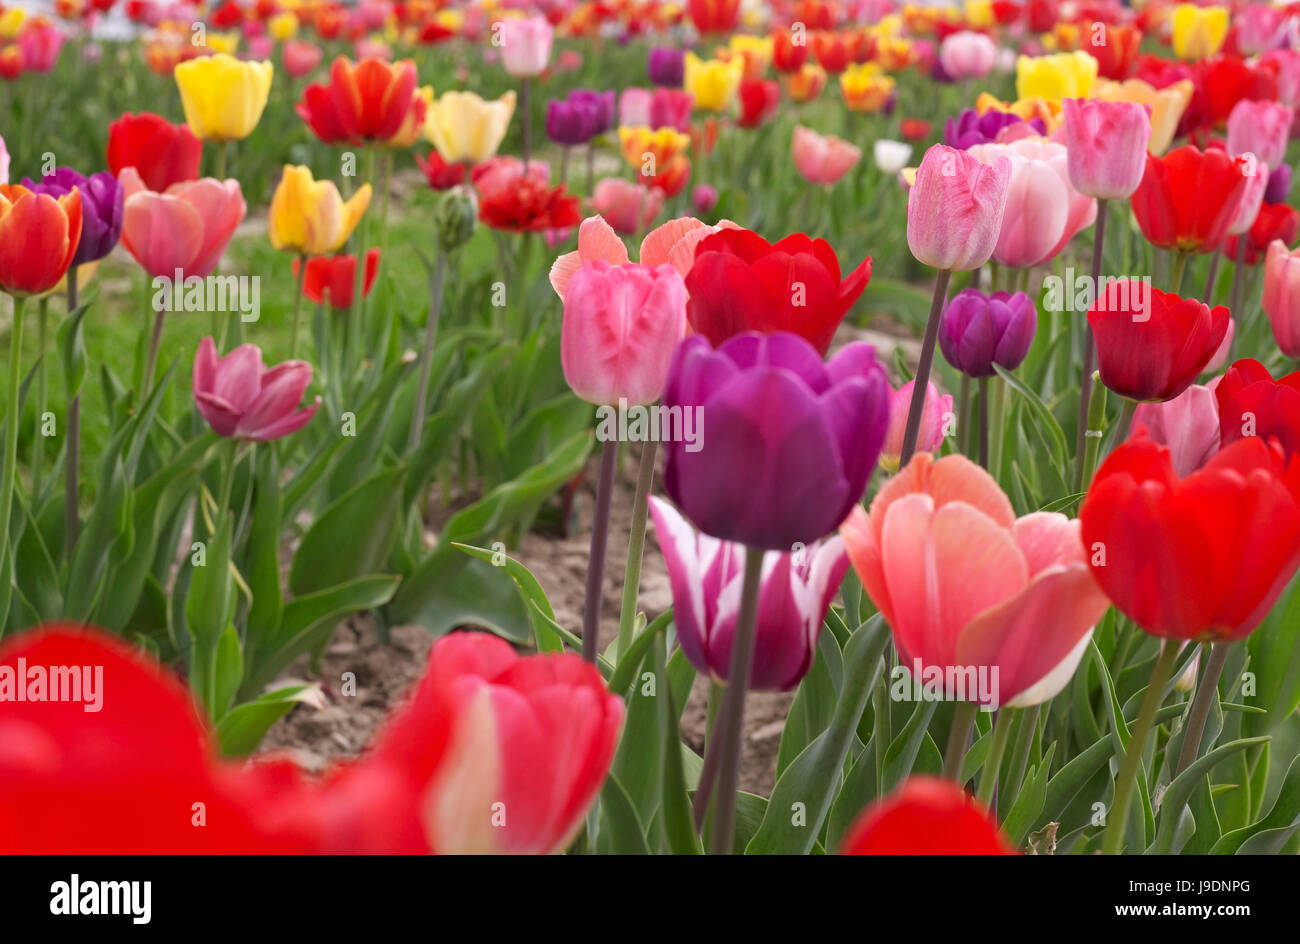 colorful field of tulips Stock Photo